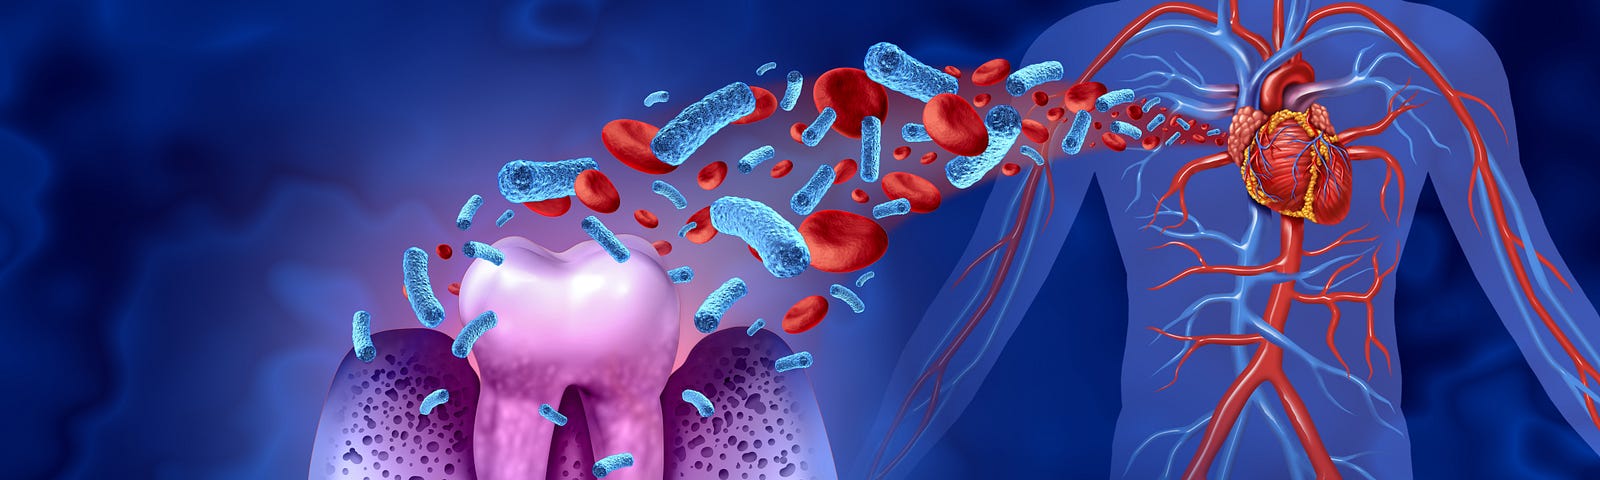 Cartoon of a tooth, with red blood cells exiting into arteries and veins in a translucent human body to the right. It is important to have good dental care. If the periodontal disease is advanced, it may be incurable. The gums may recede such that the teeth look longer.